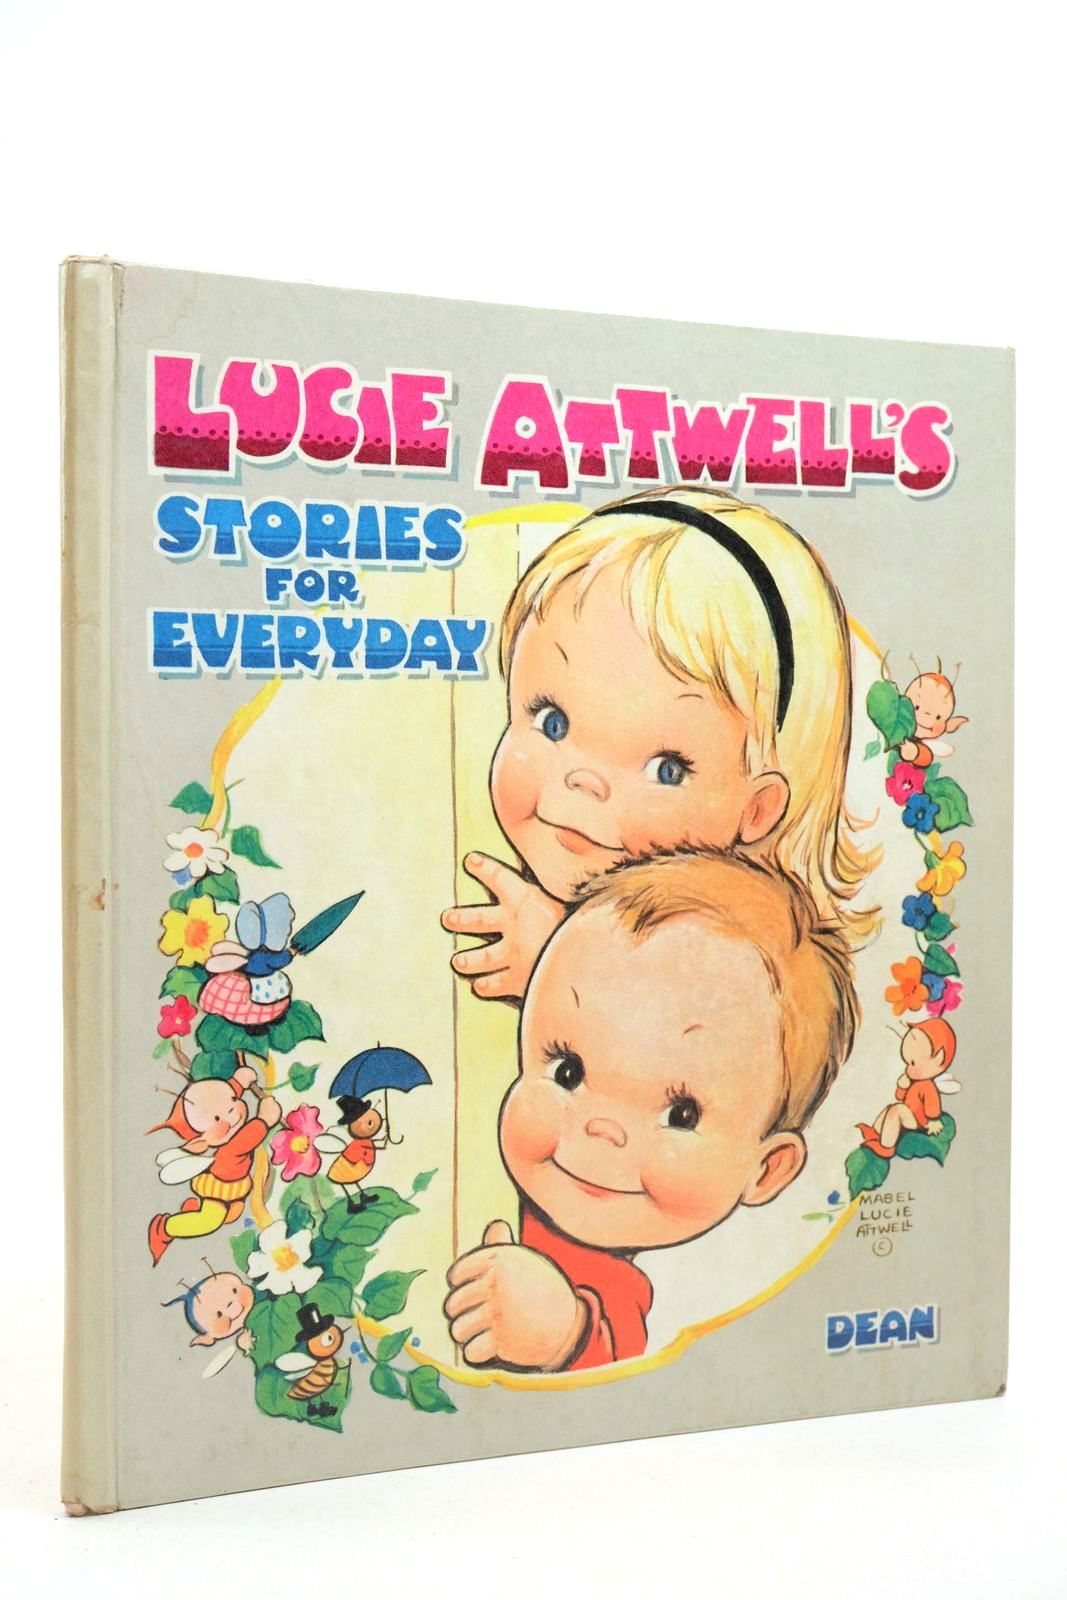 Photo of LUCIE ATTWELL'S STORIES FOR EVERYDAY written by Attwell, Mabel Lucie
Griffiths, Charles
Shepherd, Dorothy M. illustrated by Attwell, Mabel Lucie published by Dean & Son Ltd. (STOCK CODE: 2139968)  for sale by Stella & Rose's Books